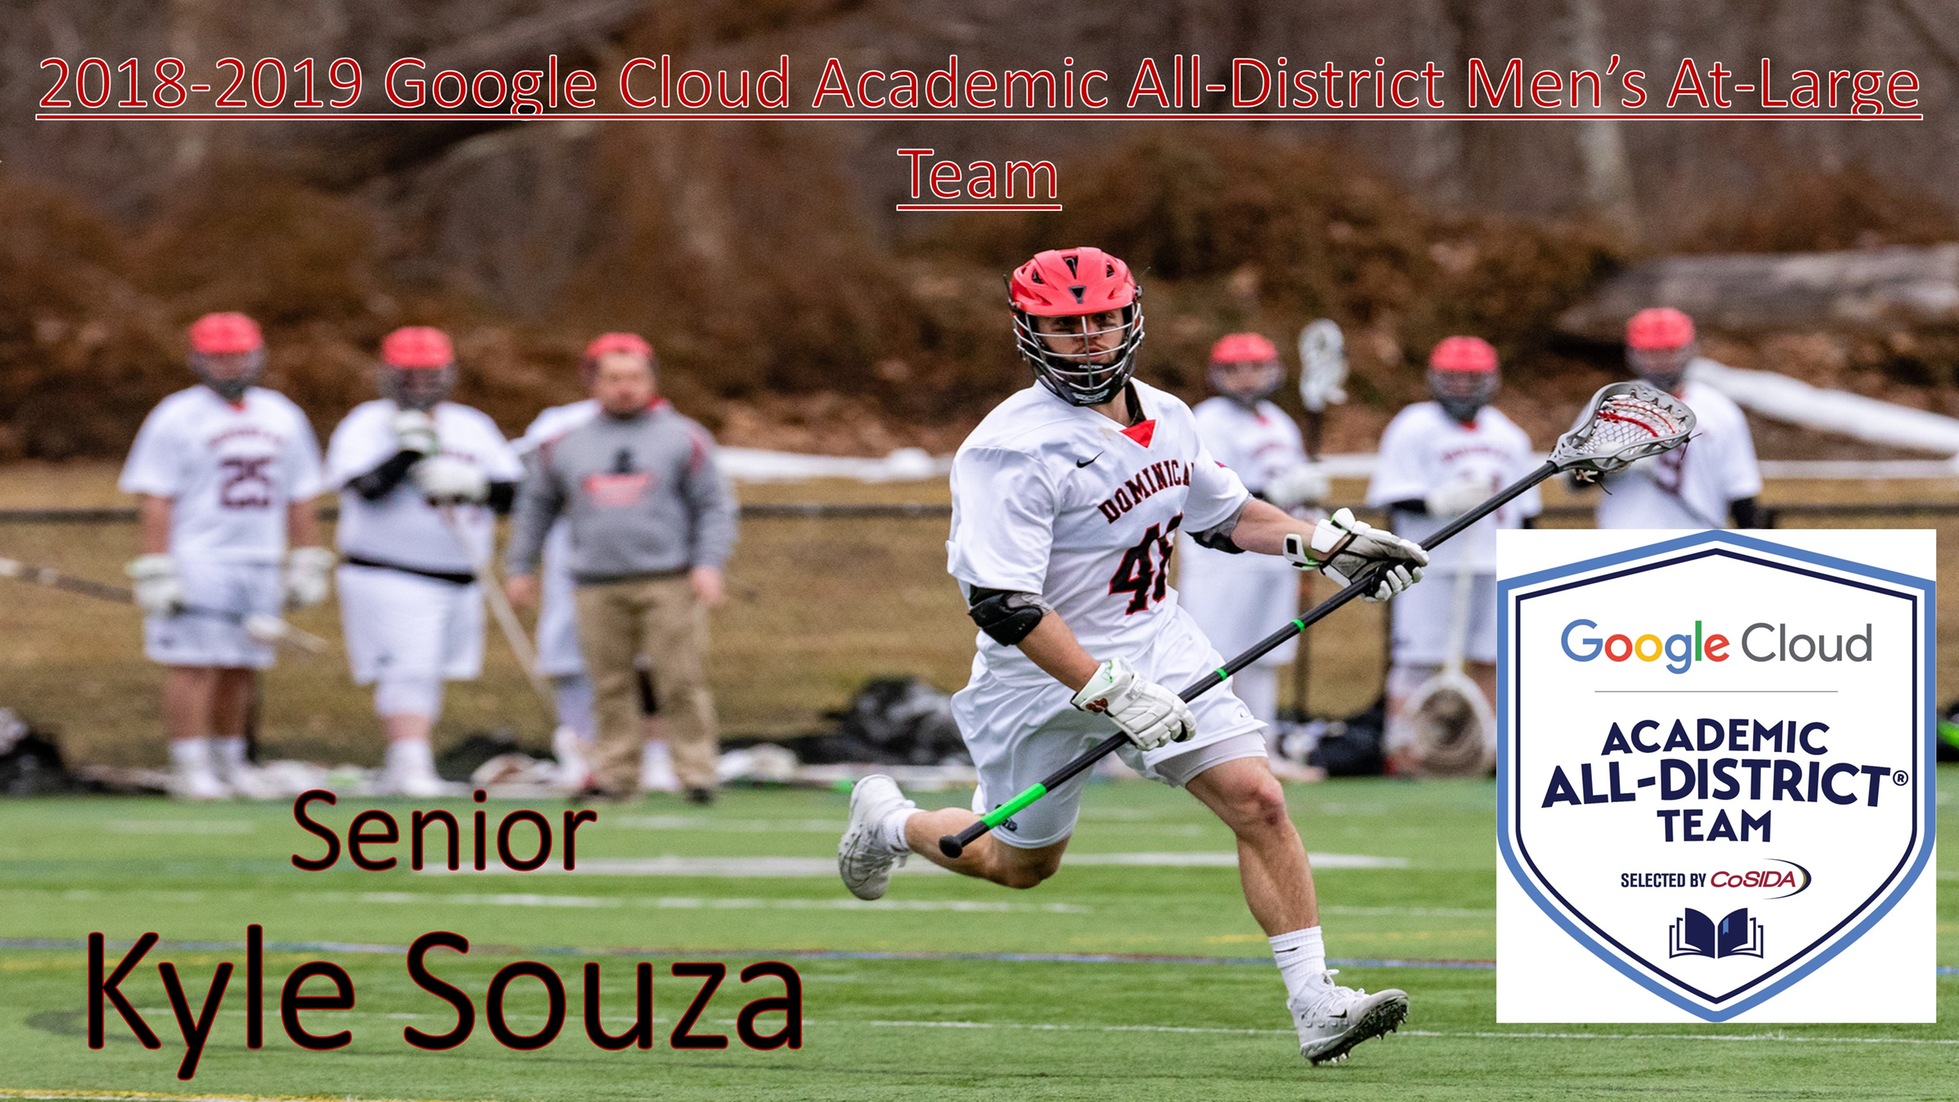 SOUZA NAMED TO 2018-2019 GOOGLE CLOUD ACADEMIC ALL-DISTRICT® MEN'S AT-LARGE TEAM